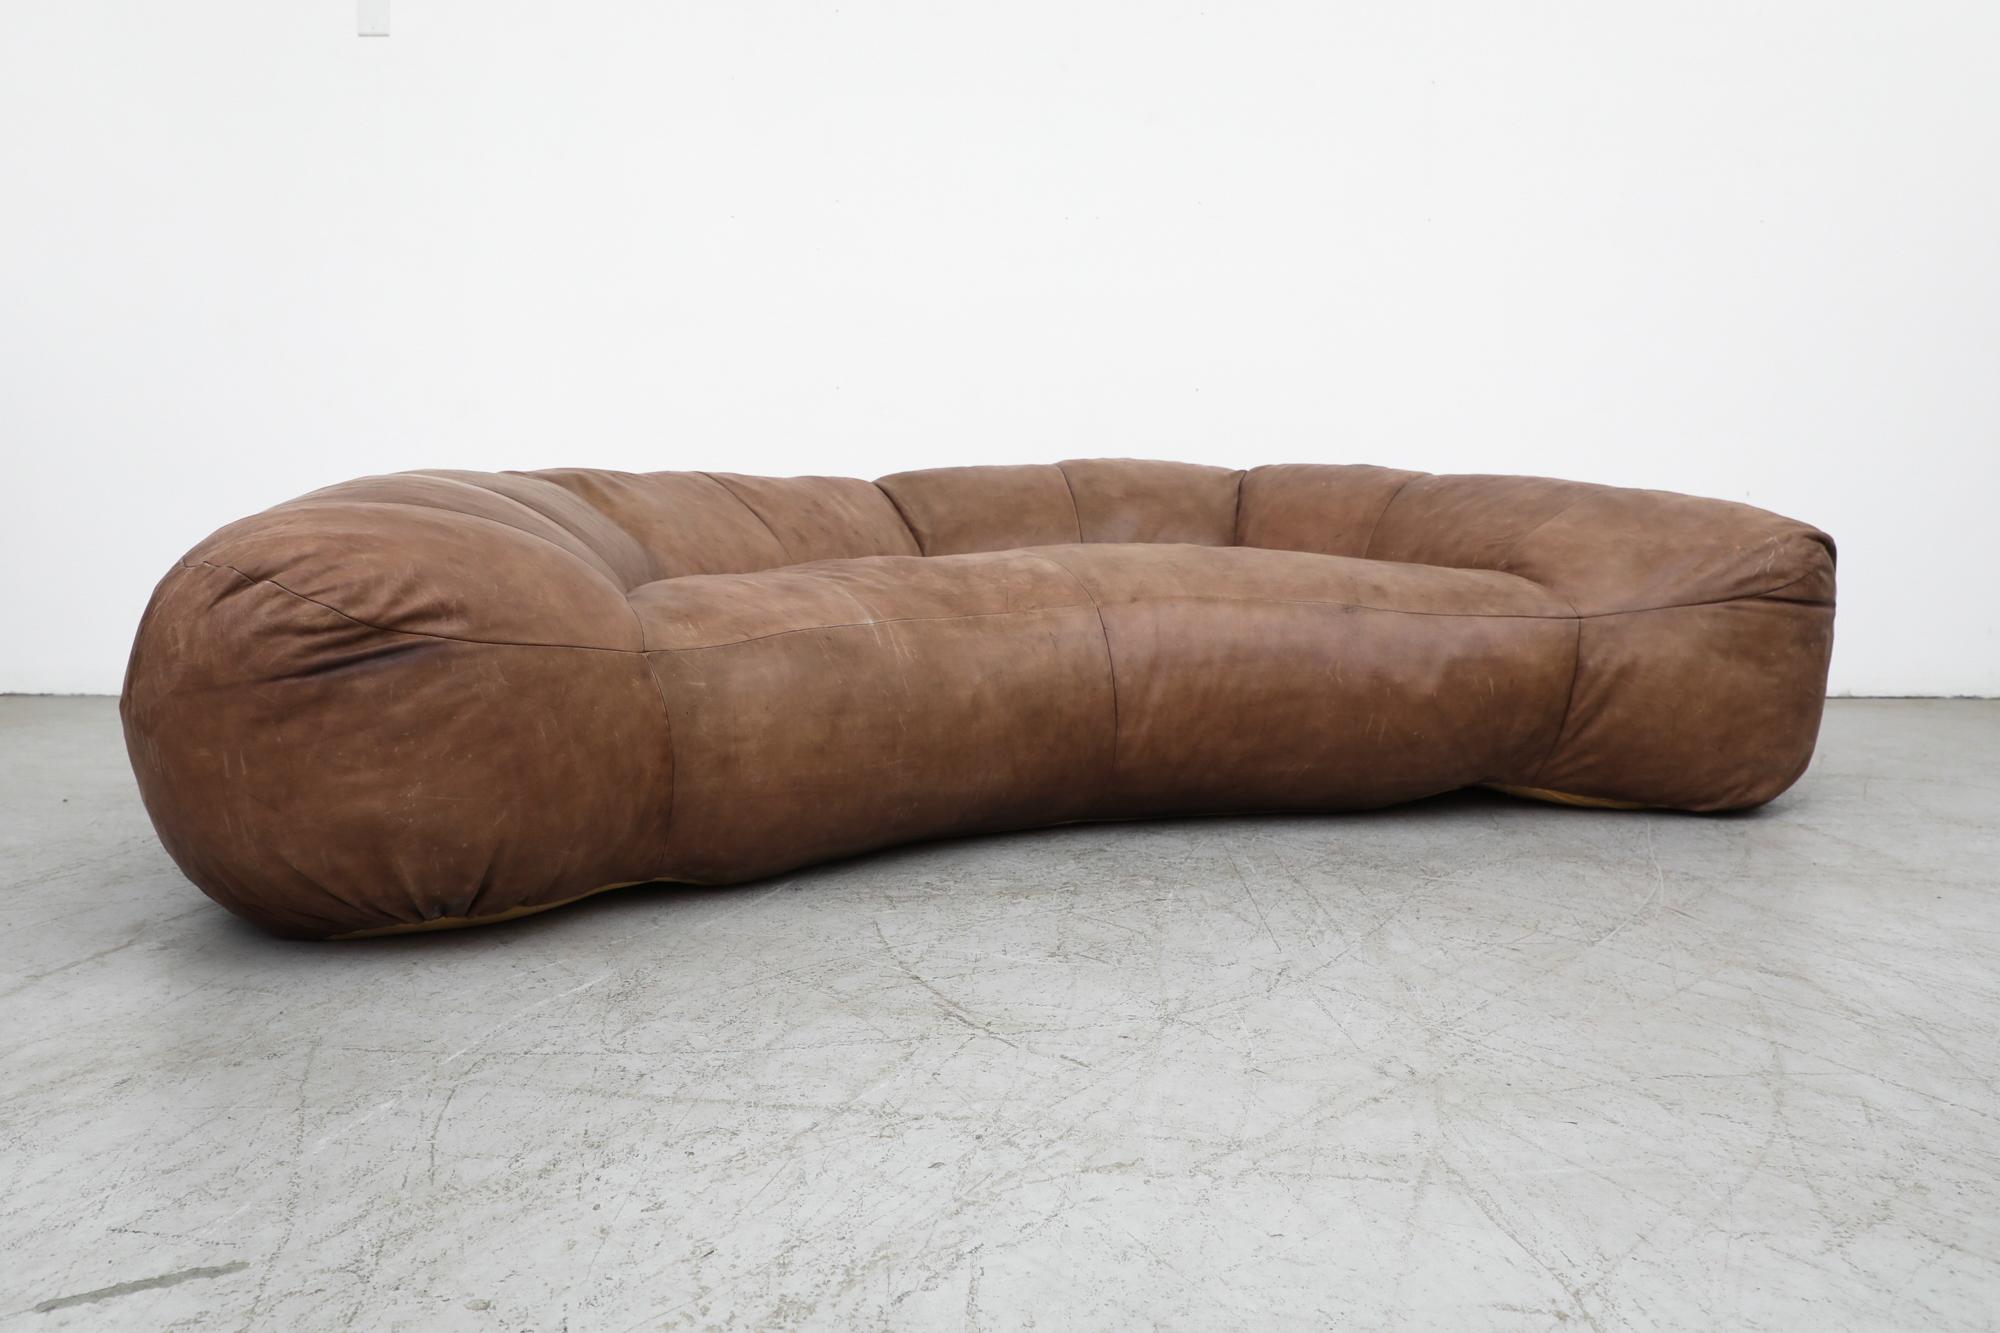 A Raphael Raffel designed, 1970s, made-to-order natural leather Croissant Sofa for Honore Paris. Raphael Raffel (1912-2000), who trained at the École des Beaux Arts, was a well-known interior decorator whose work was collected by the likes of